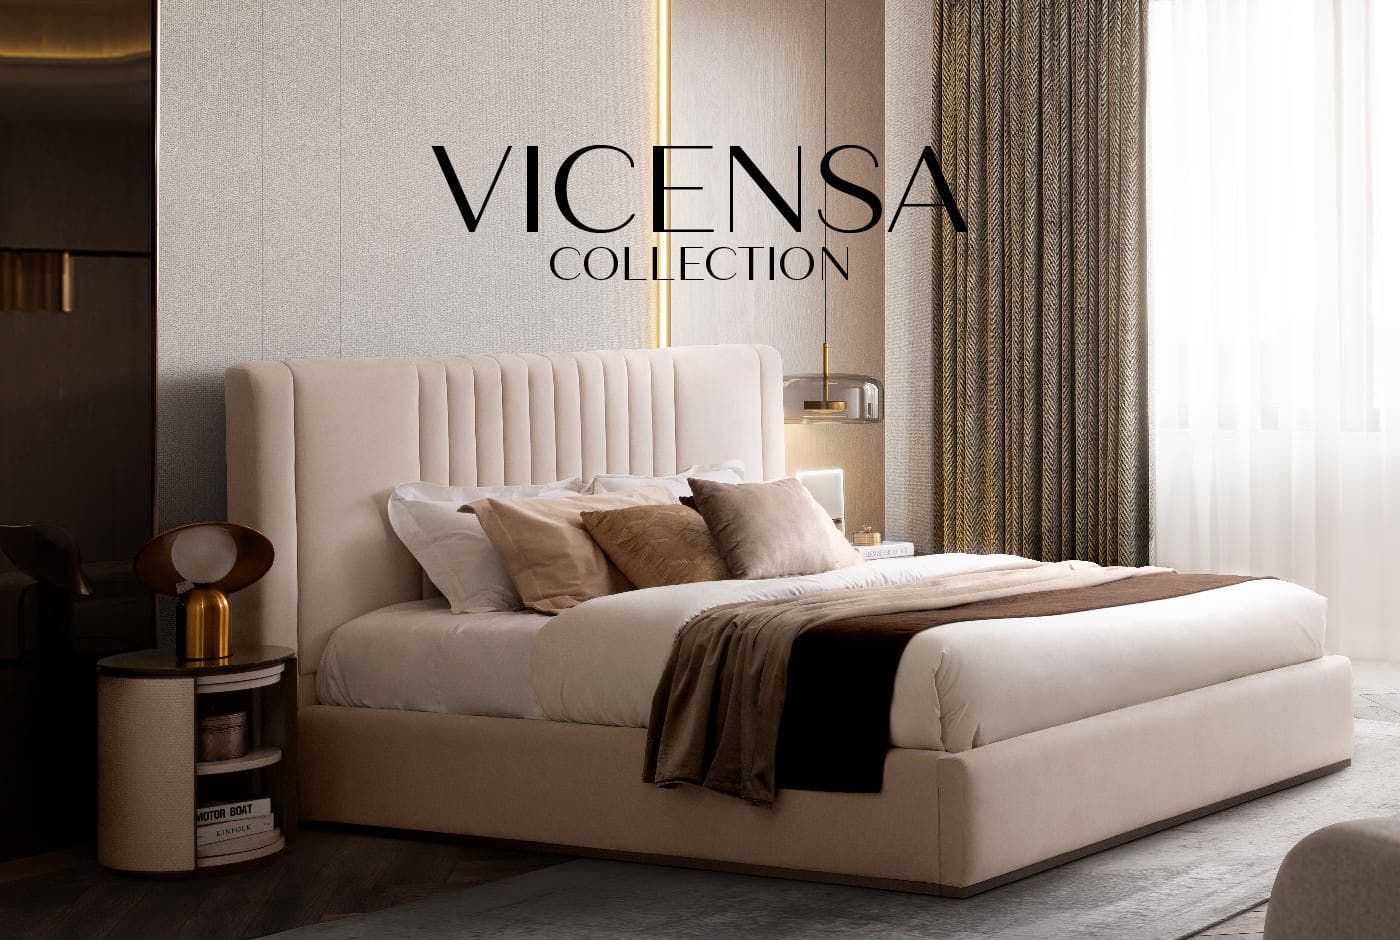 VICENSA COLLECTION